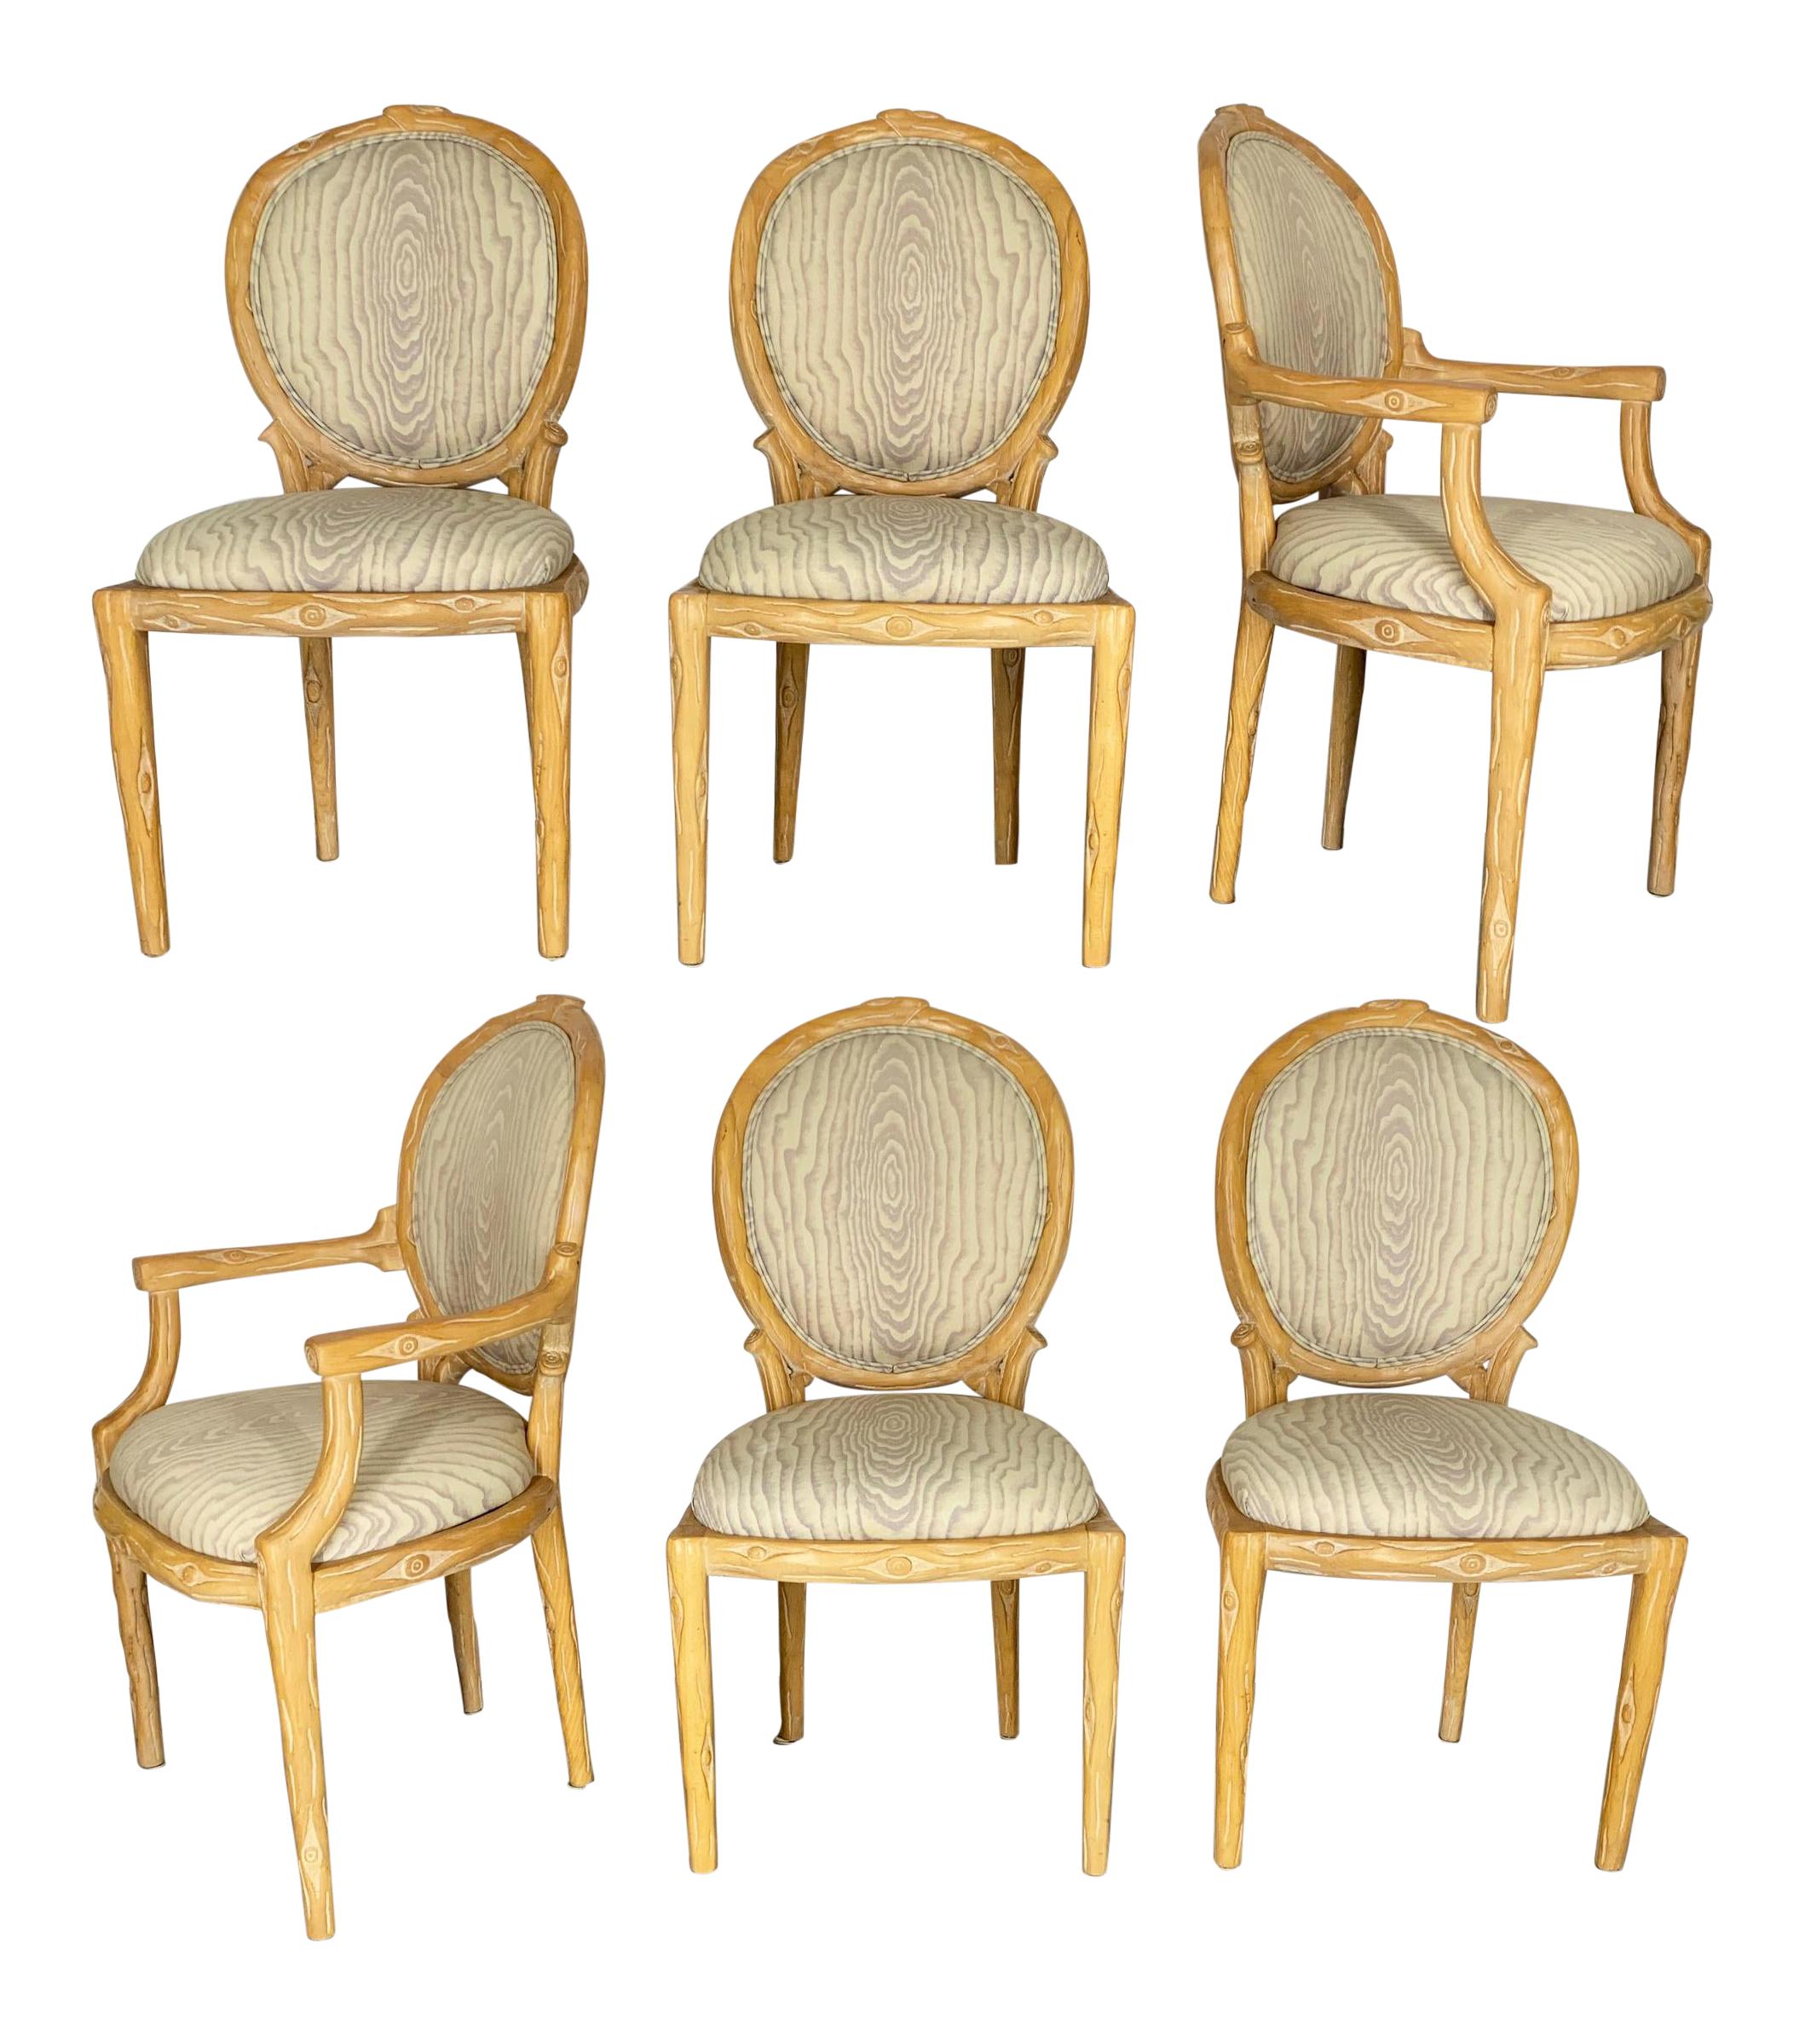 Late 20th Century Vintage Faux Bois Dining Chairs - Set of 6